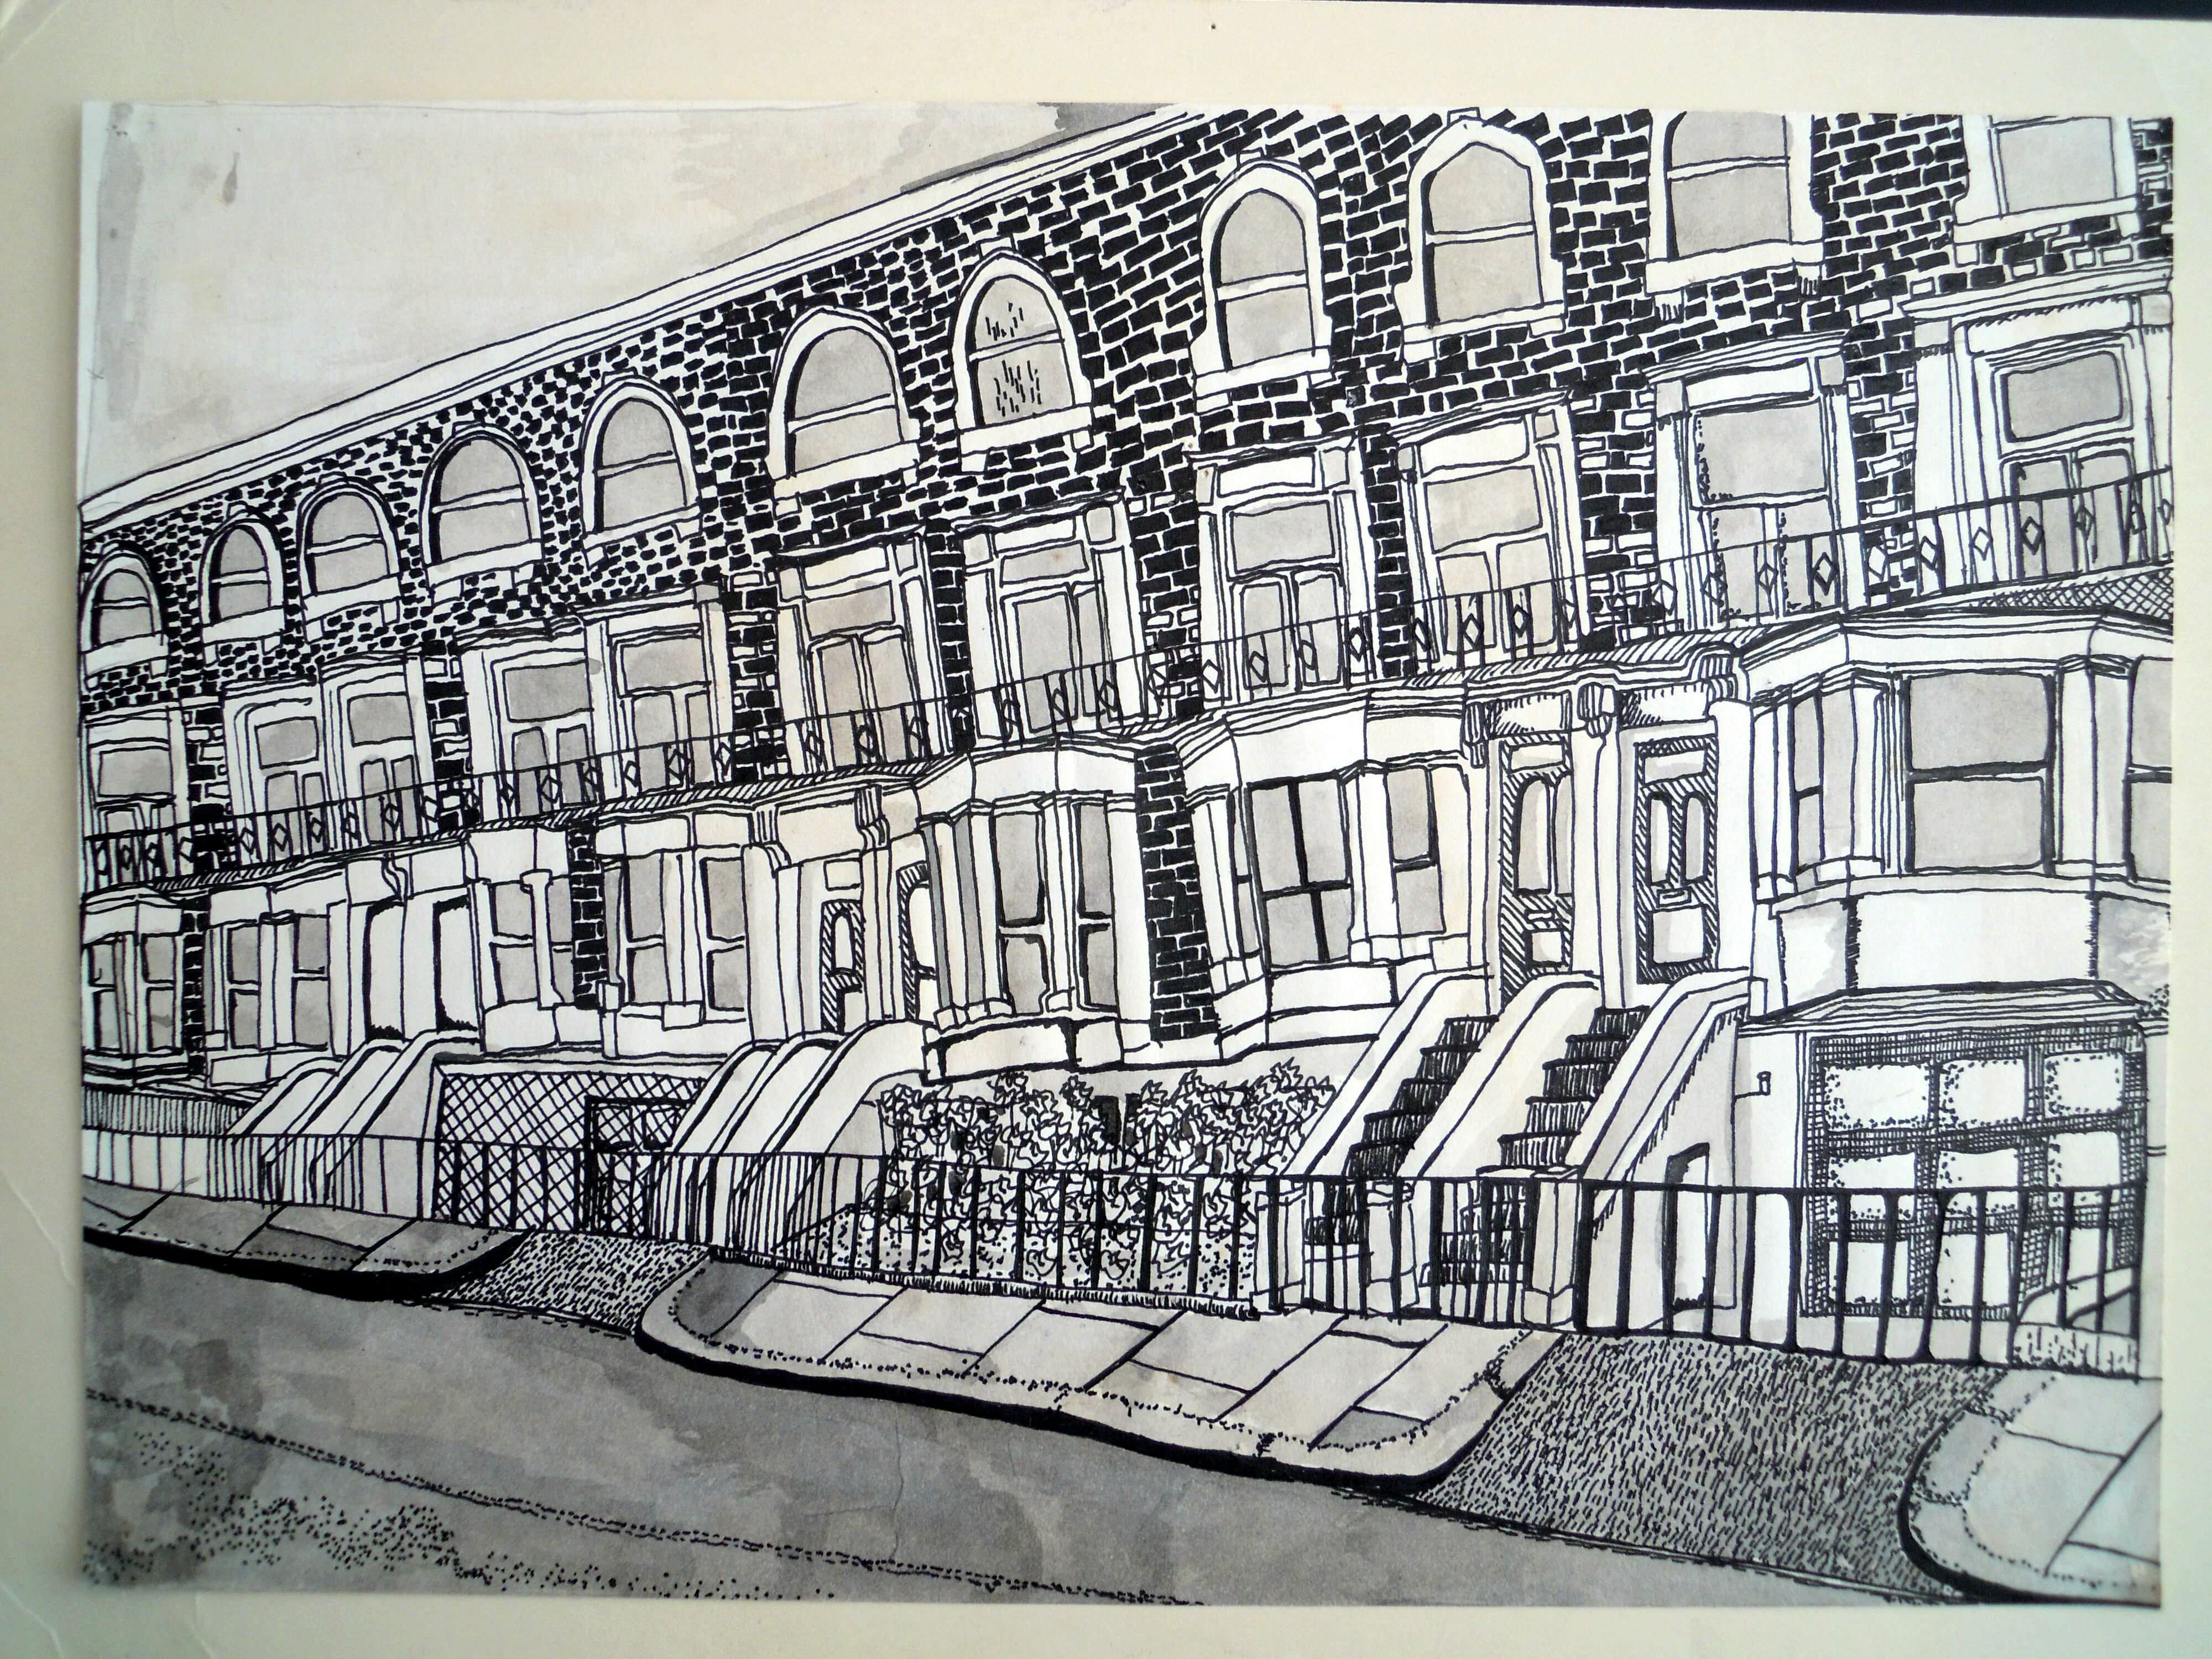 A pen and ink drawing of a row of terraced houses